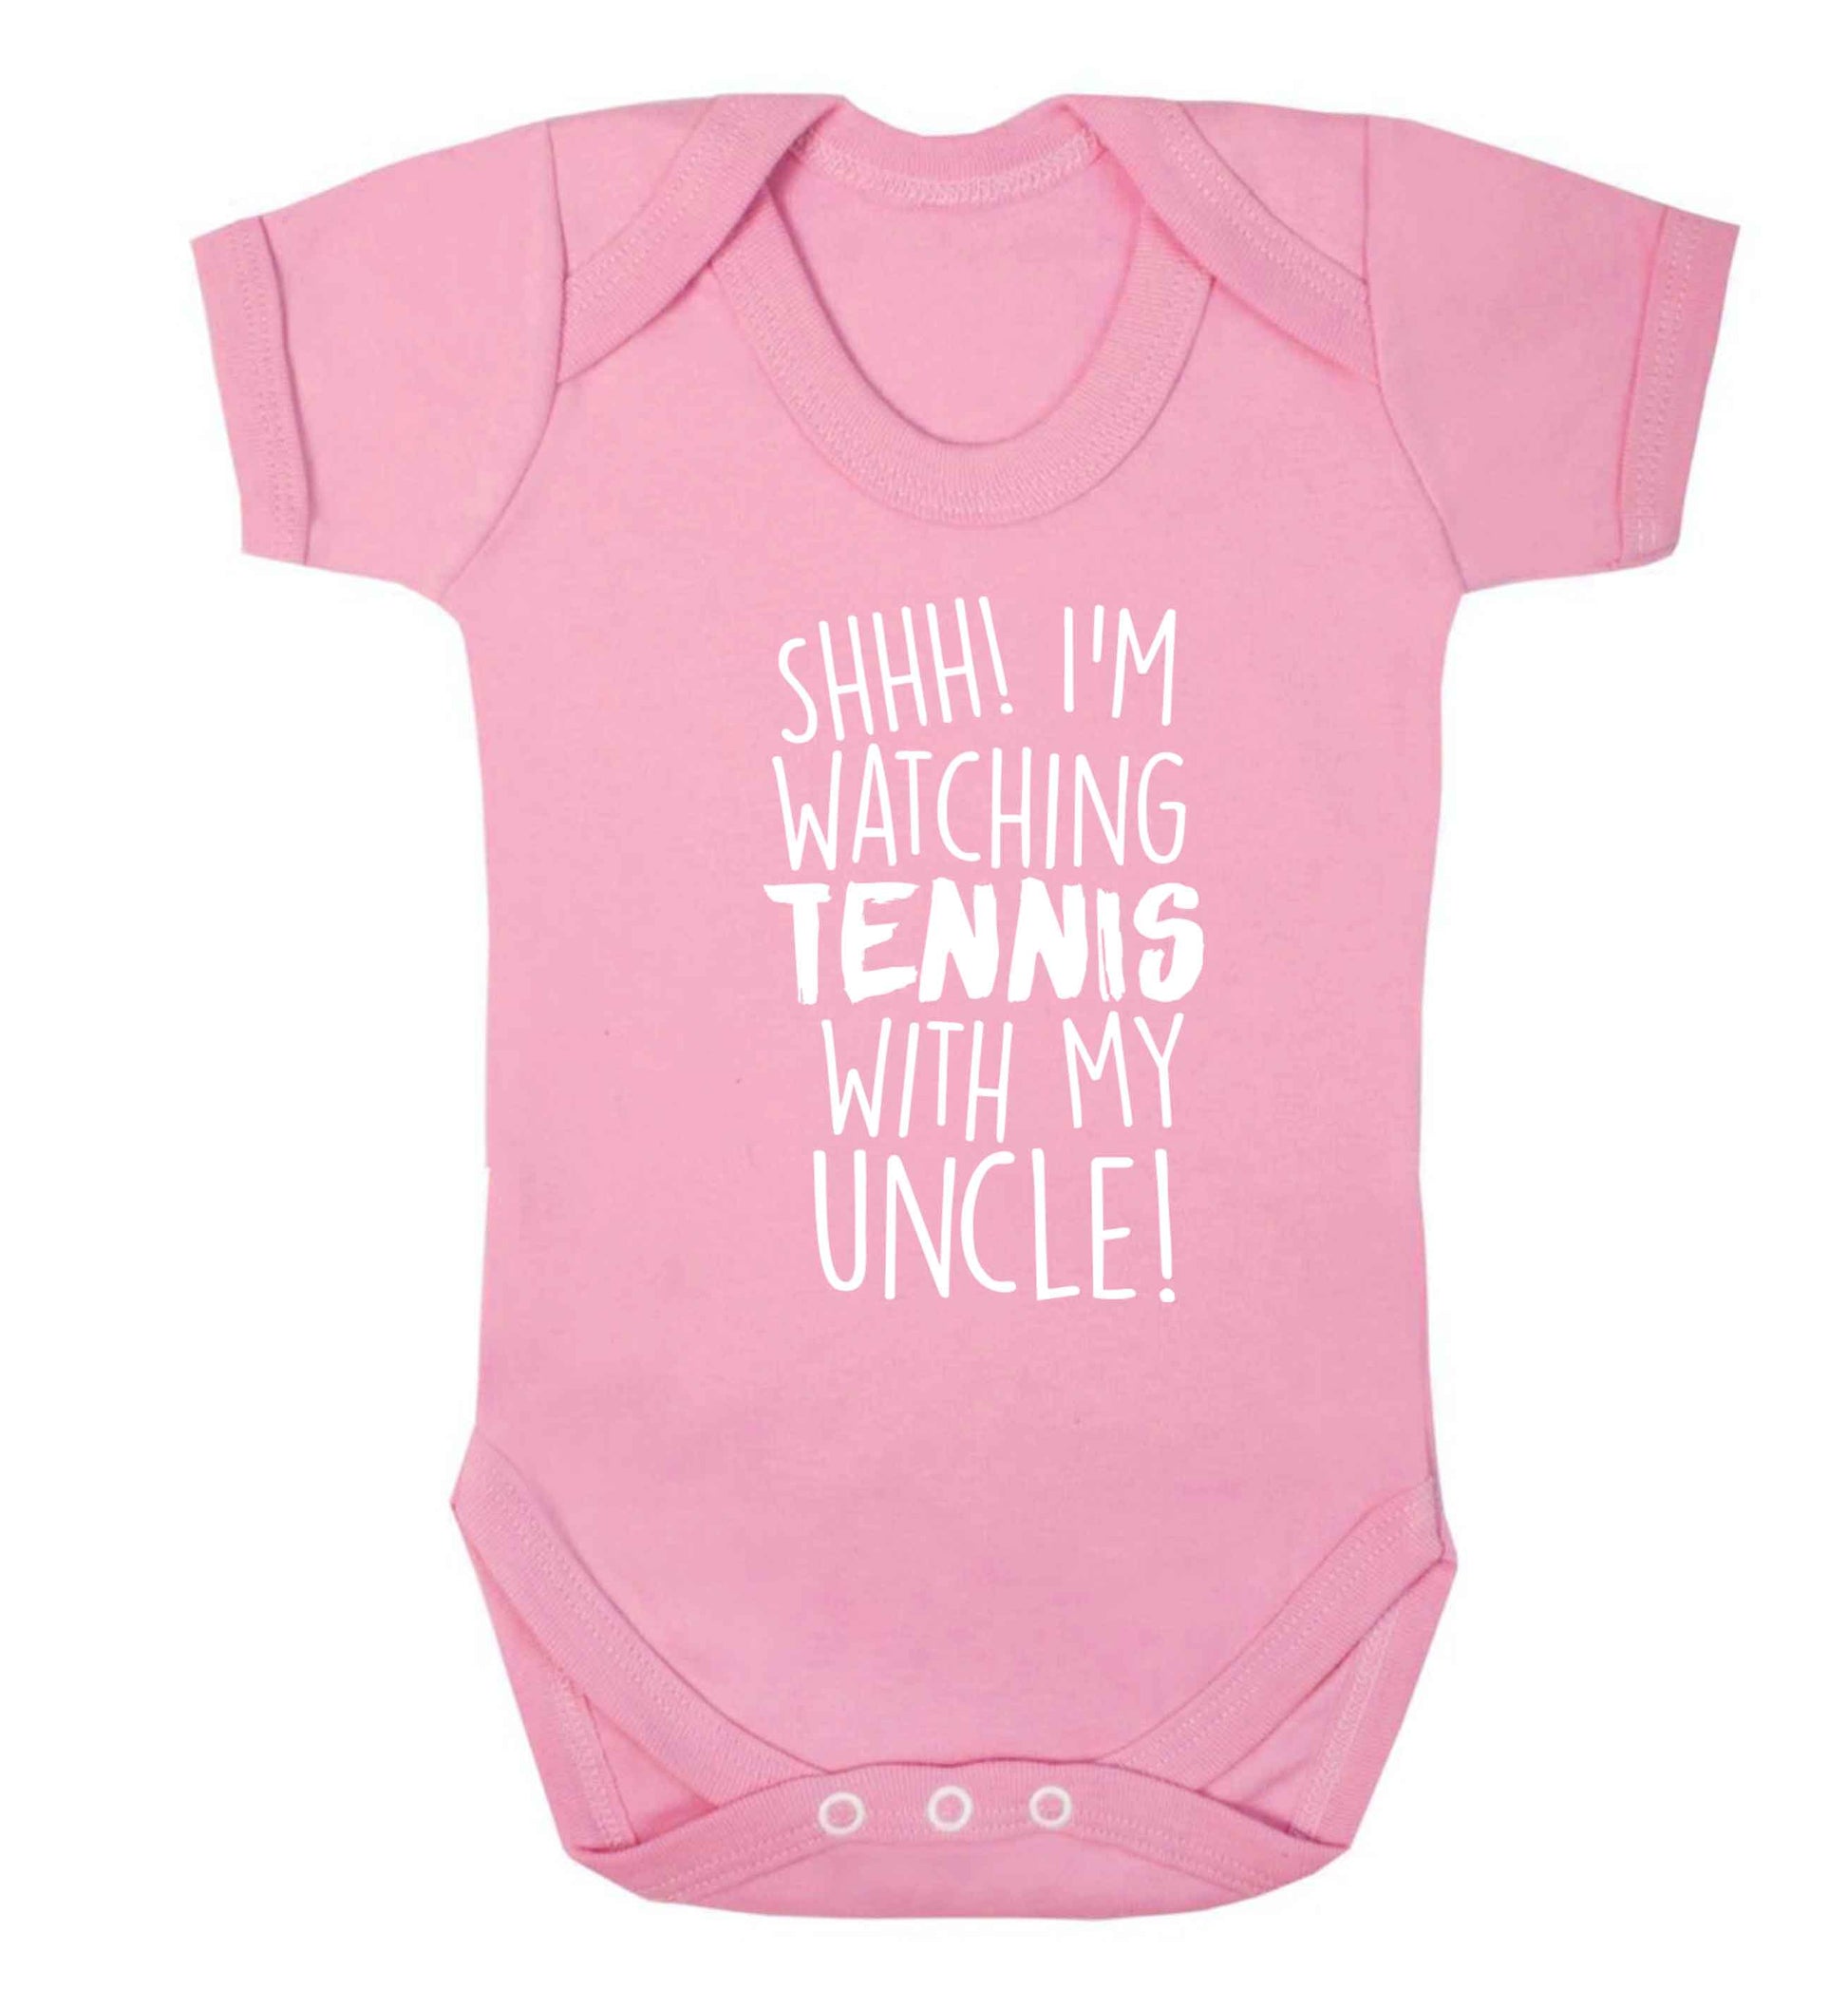 Shh! I'm watching tennis with my uncle! Baby Vest pale pink 18-24 months